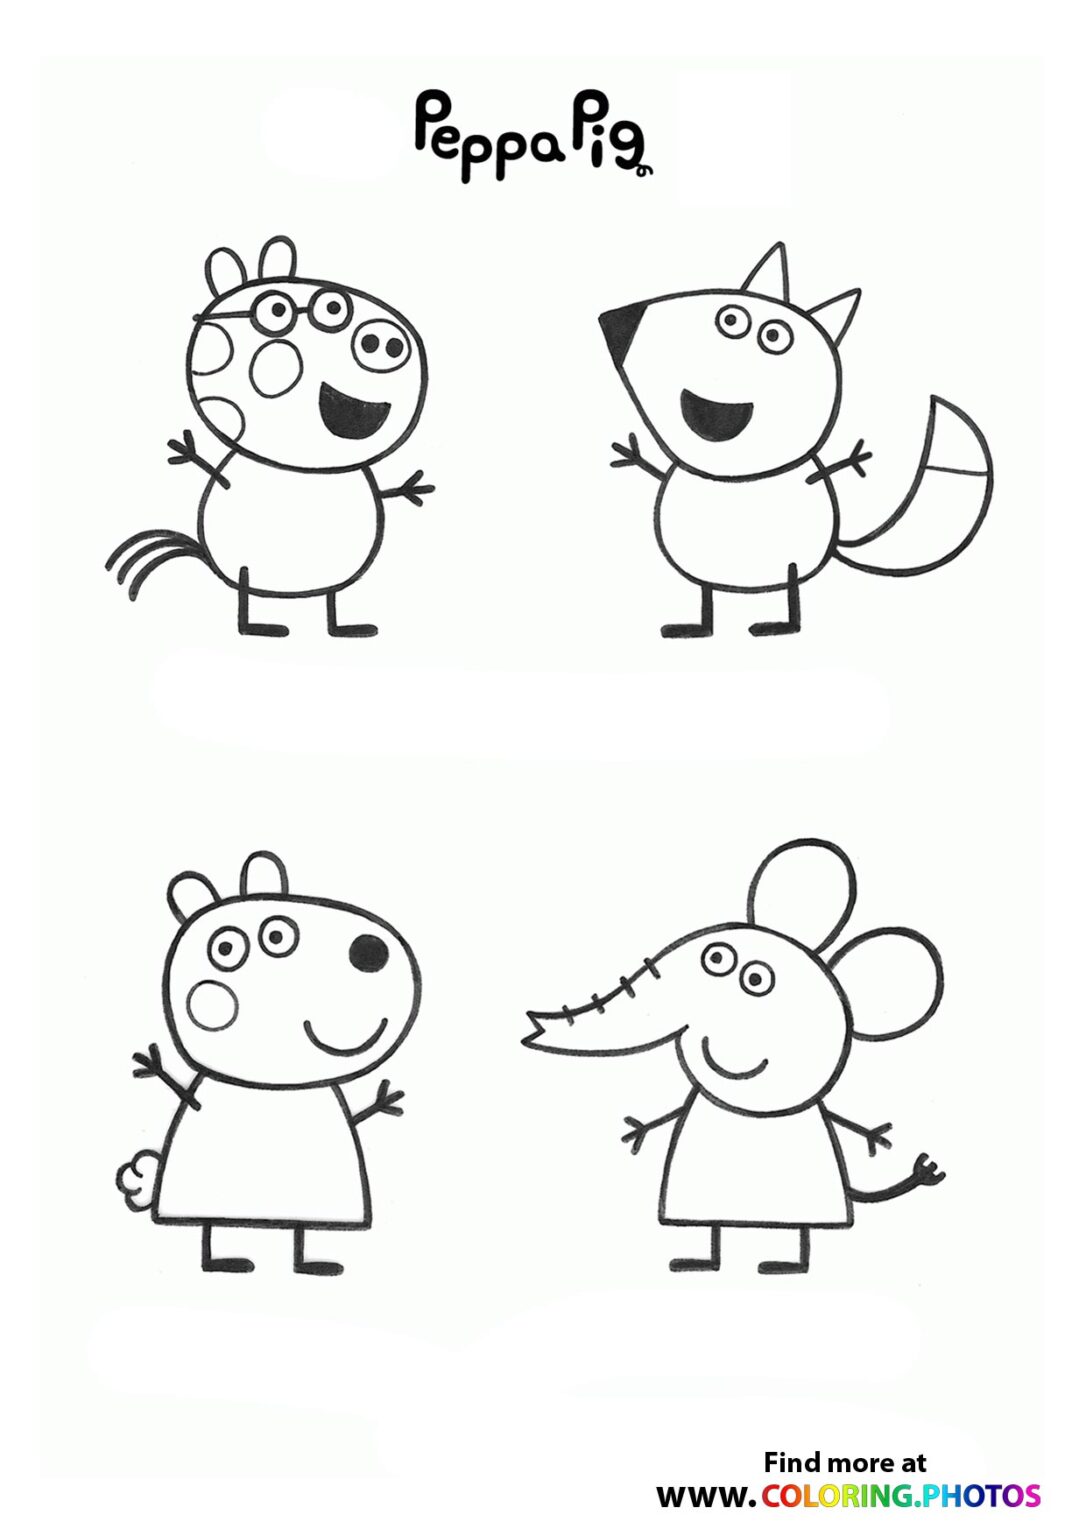 Peppa Pig's friends - Coloring Pages for kids